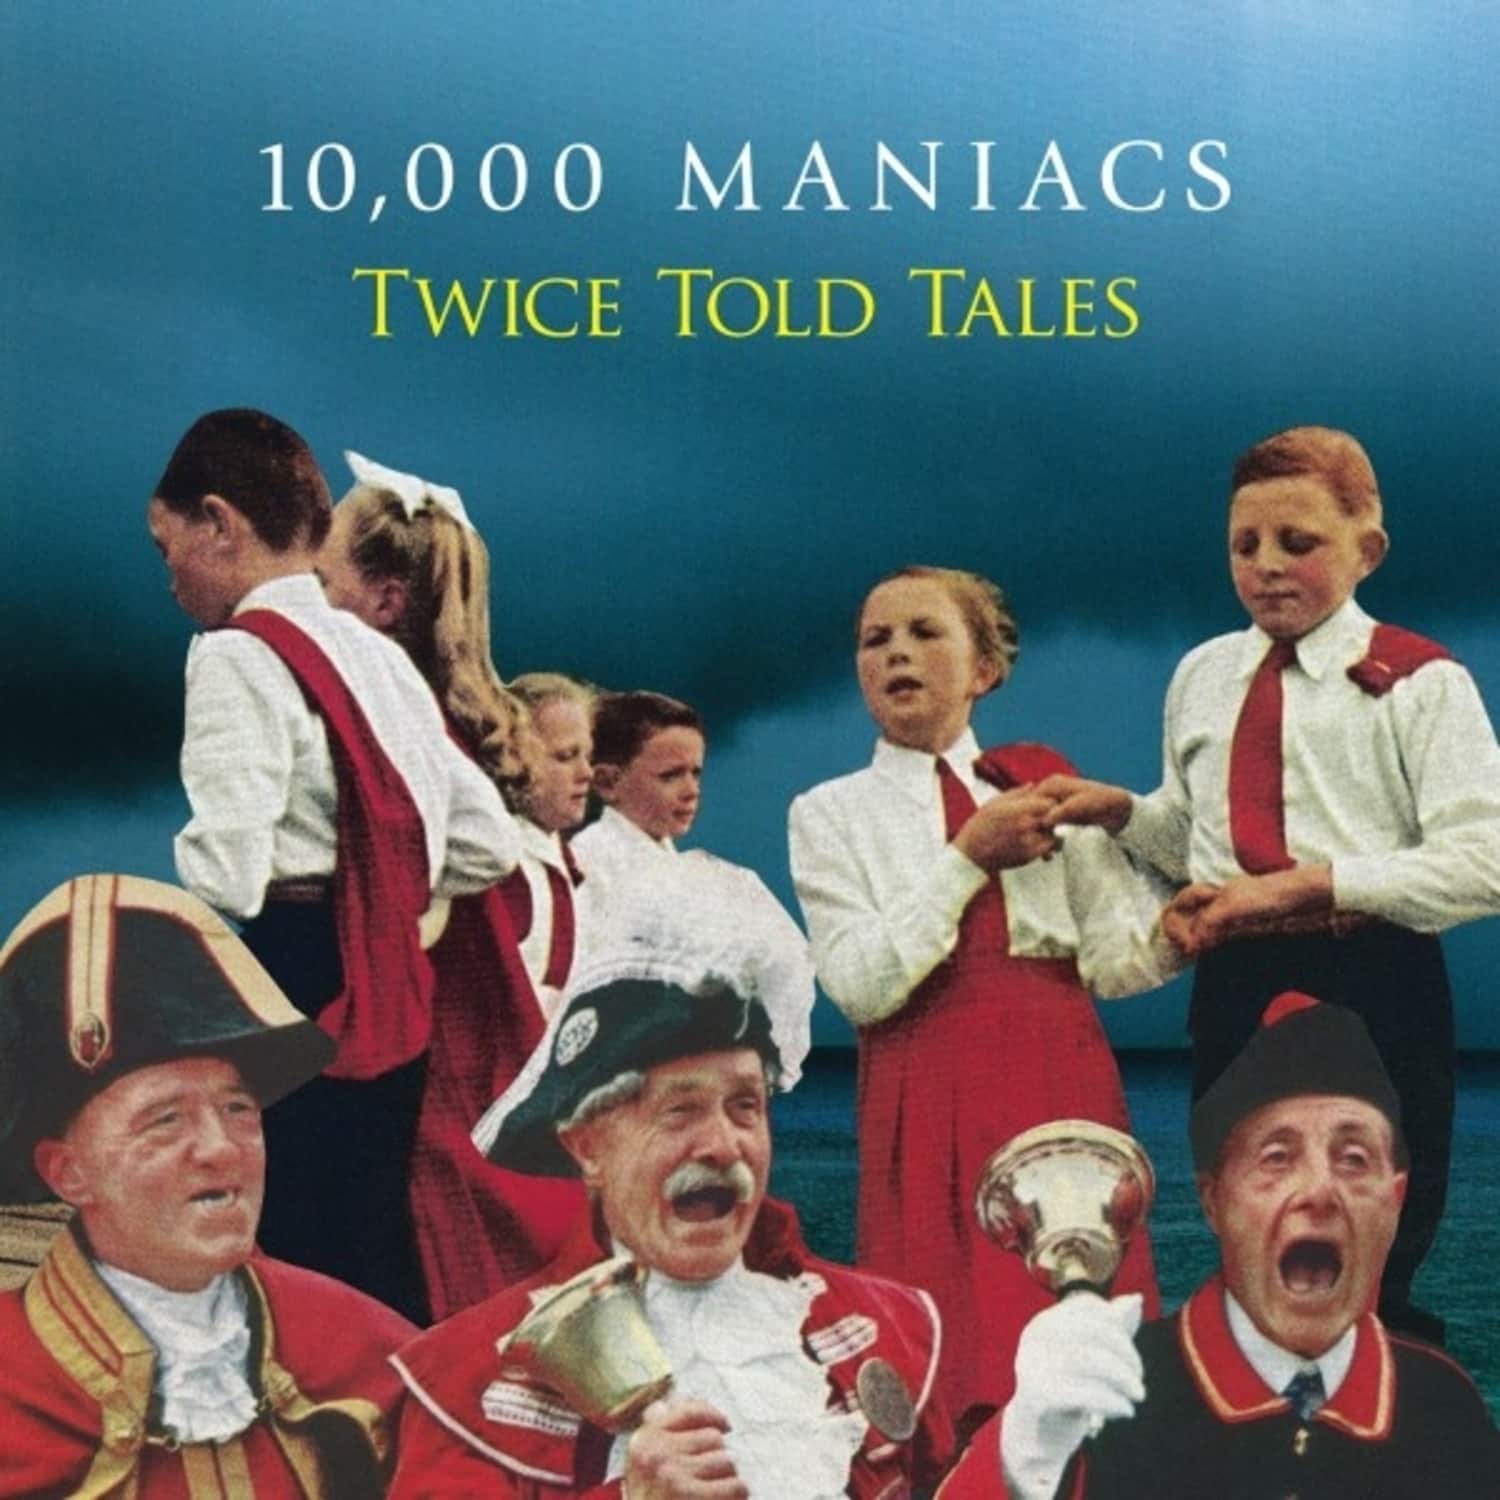 000 Maniacs 10 - TWICE TOLD TALES WHITE 